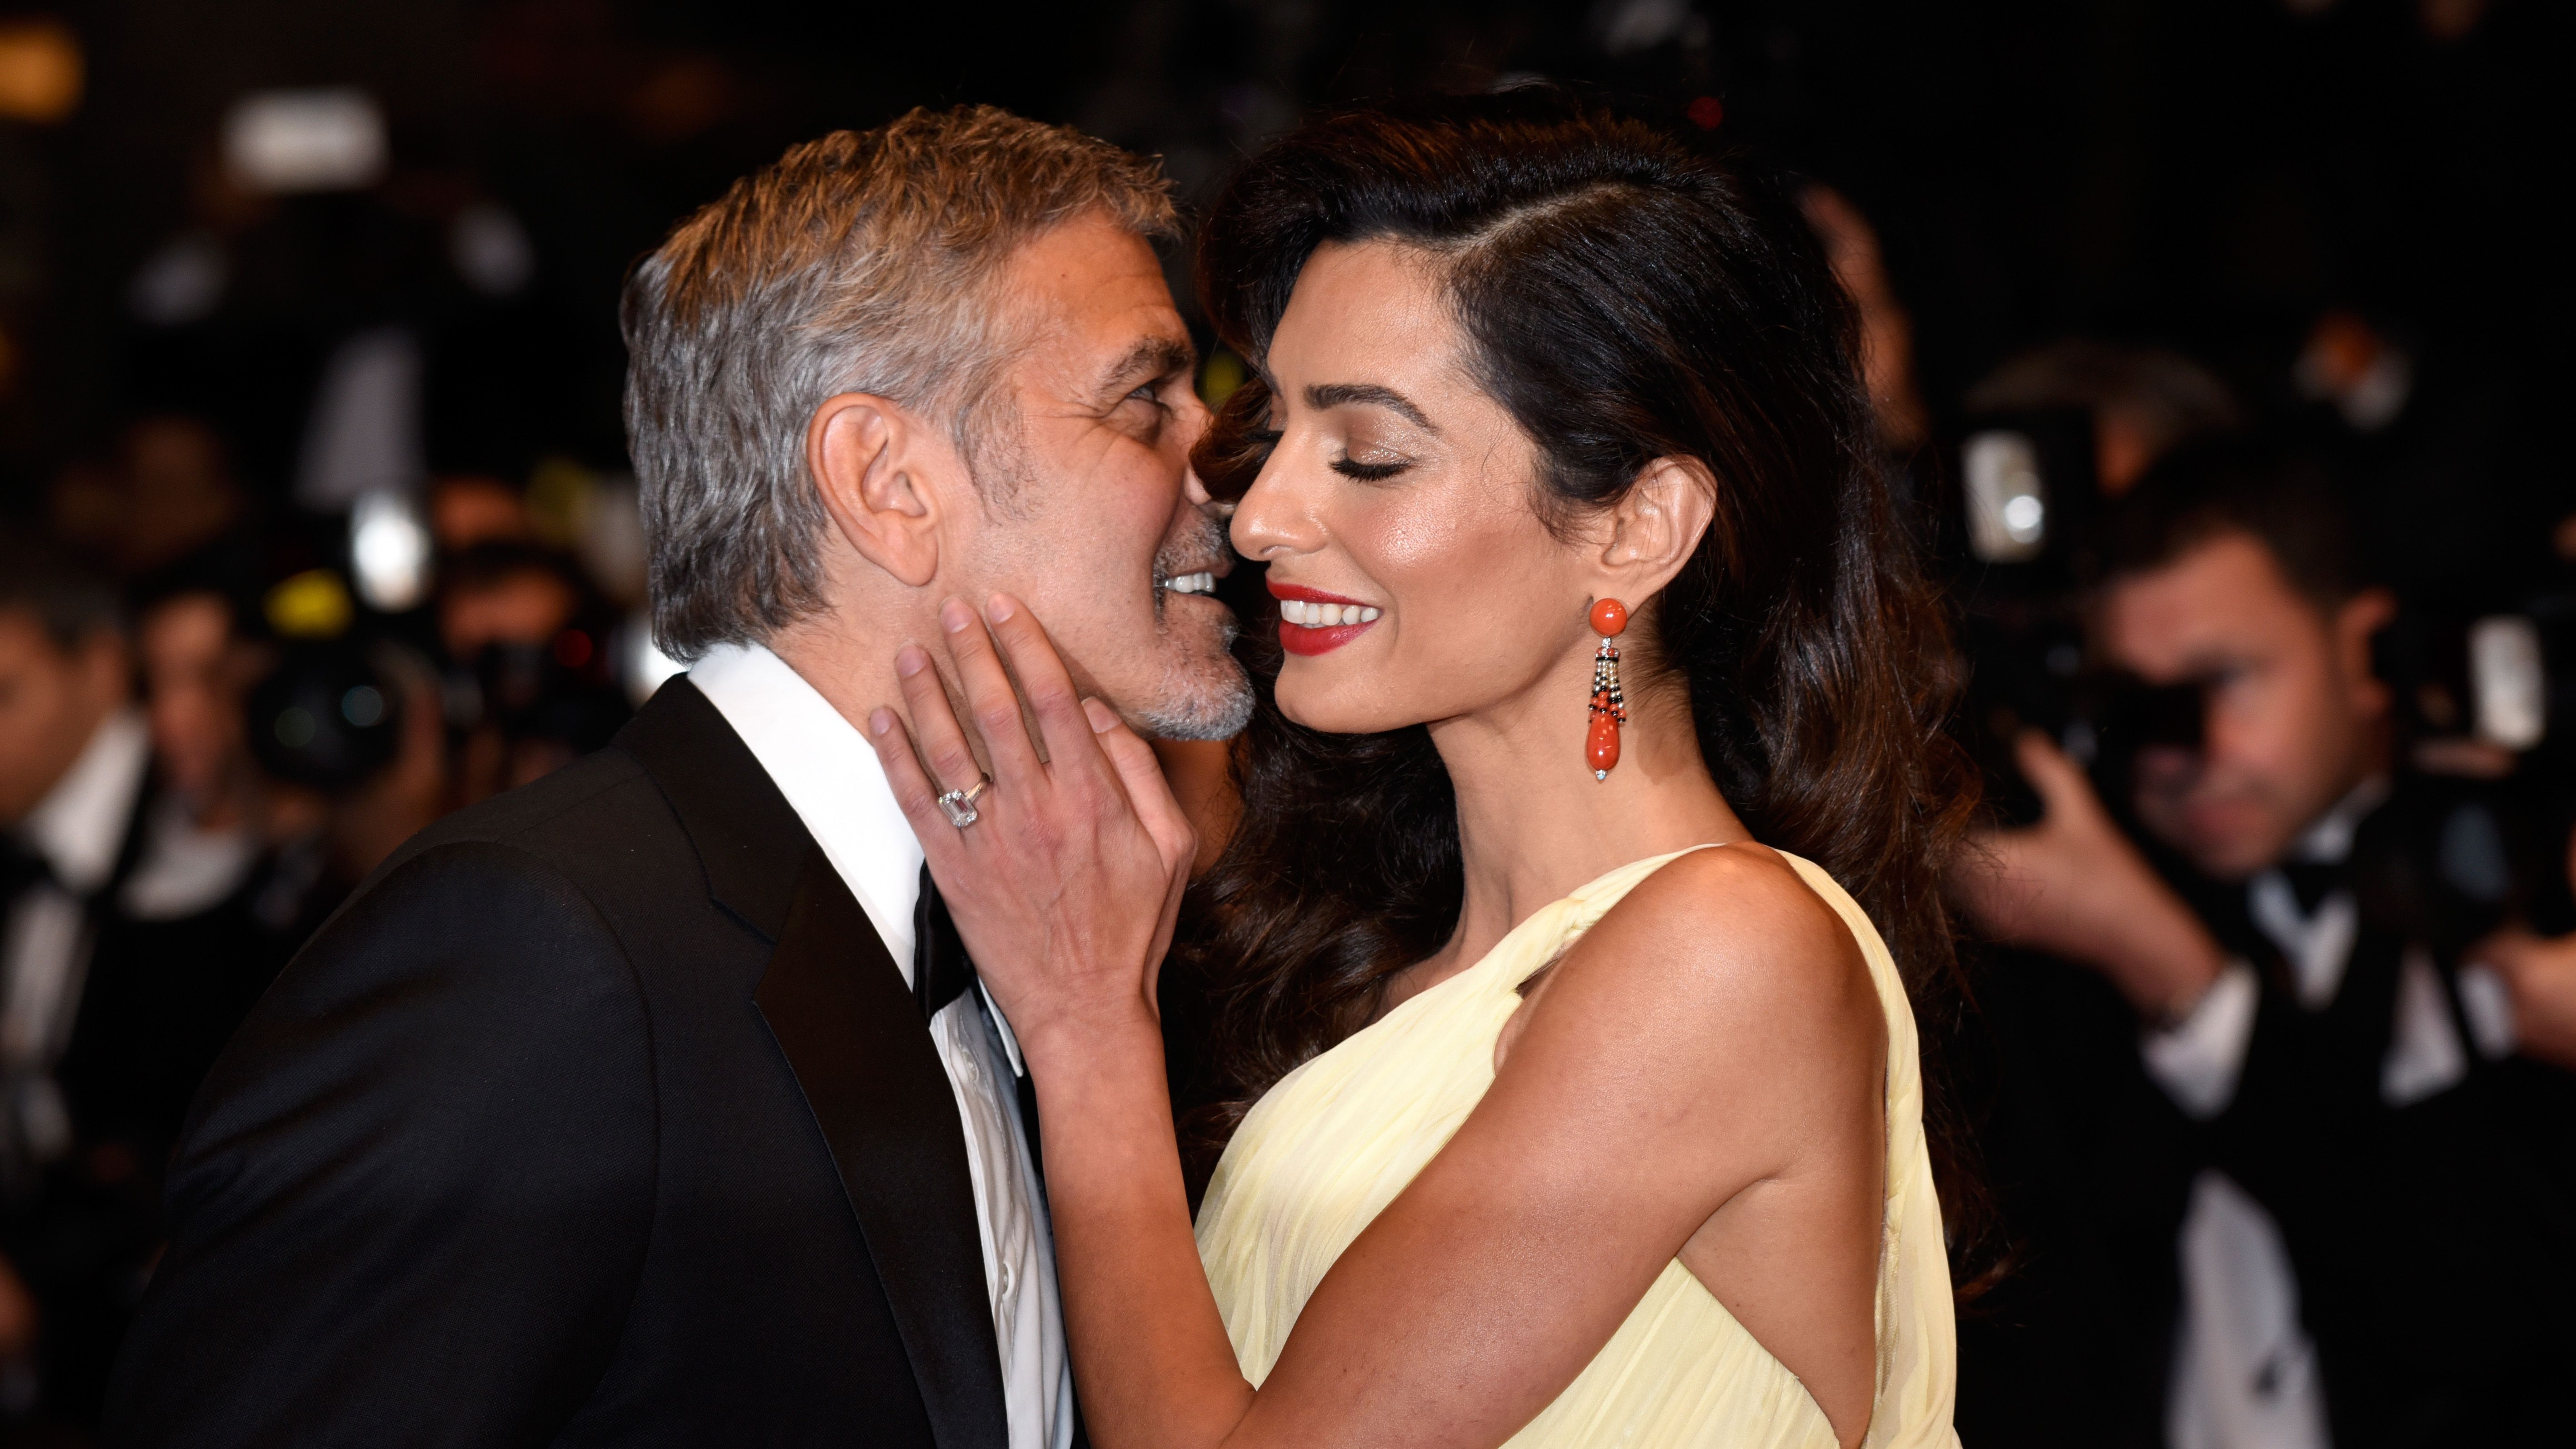 https://hips.hearstapps.com/hmg-prod/images/actor-george-clooney-and-his-wife-amal-clooney-attend-the-news-photo-1578417537.jpg?crop=1xw:0.84263xh;center,top